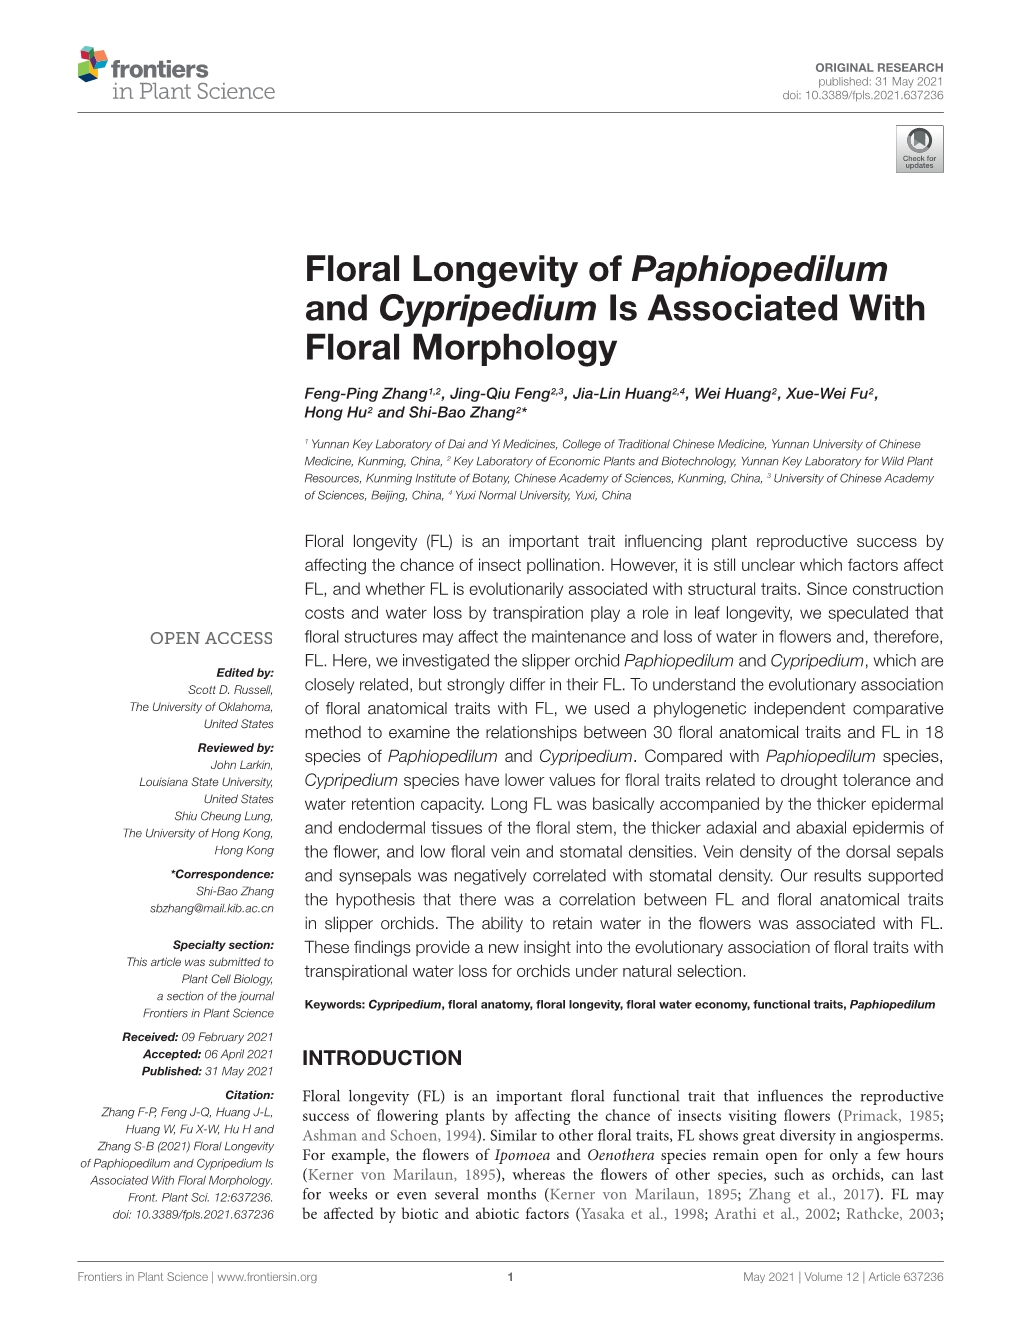 Floral Longevity of Paphiopedilum and Cypripedium Is Associated with Floral Morphology